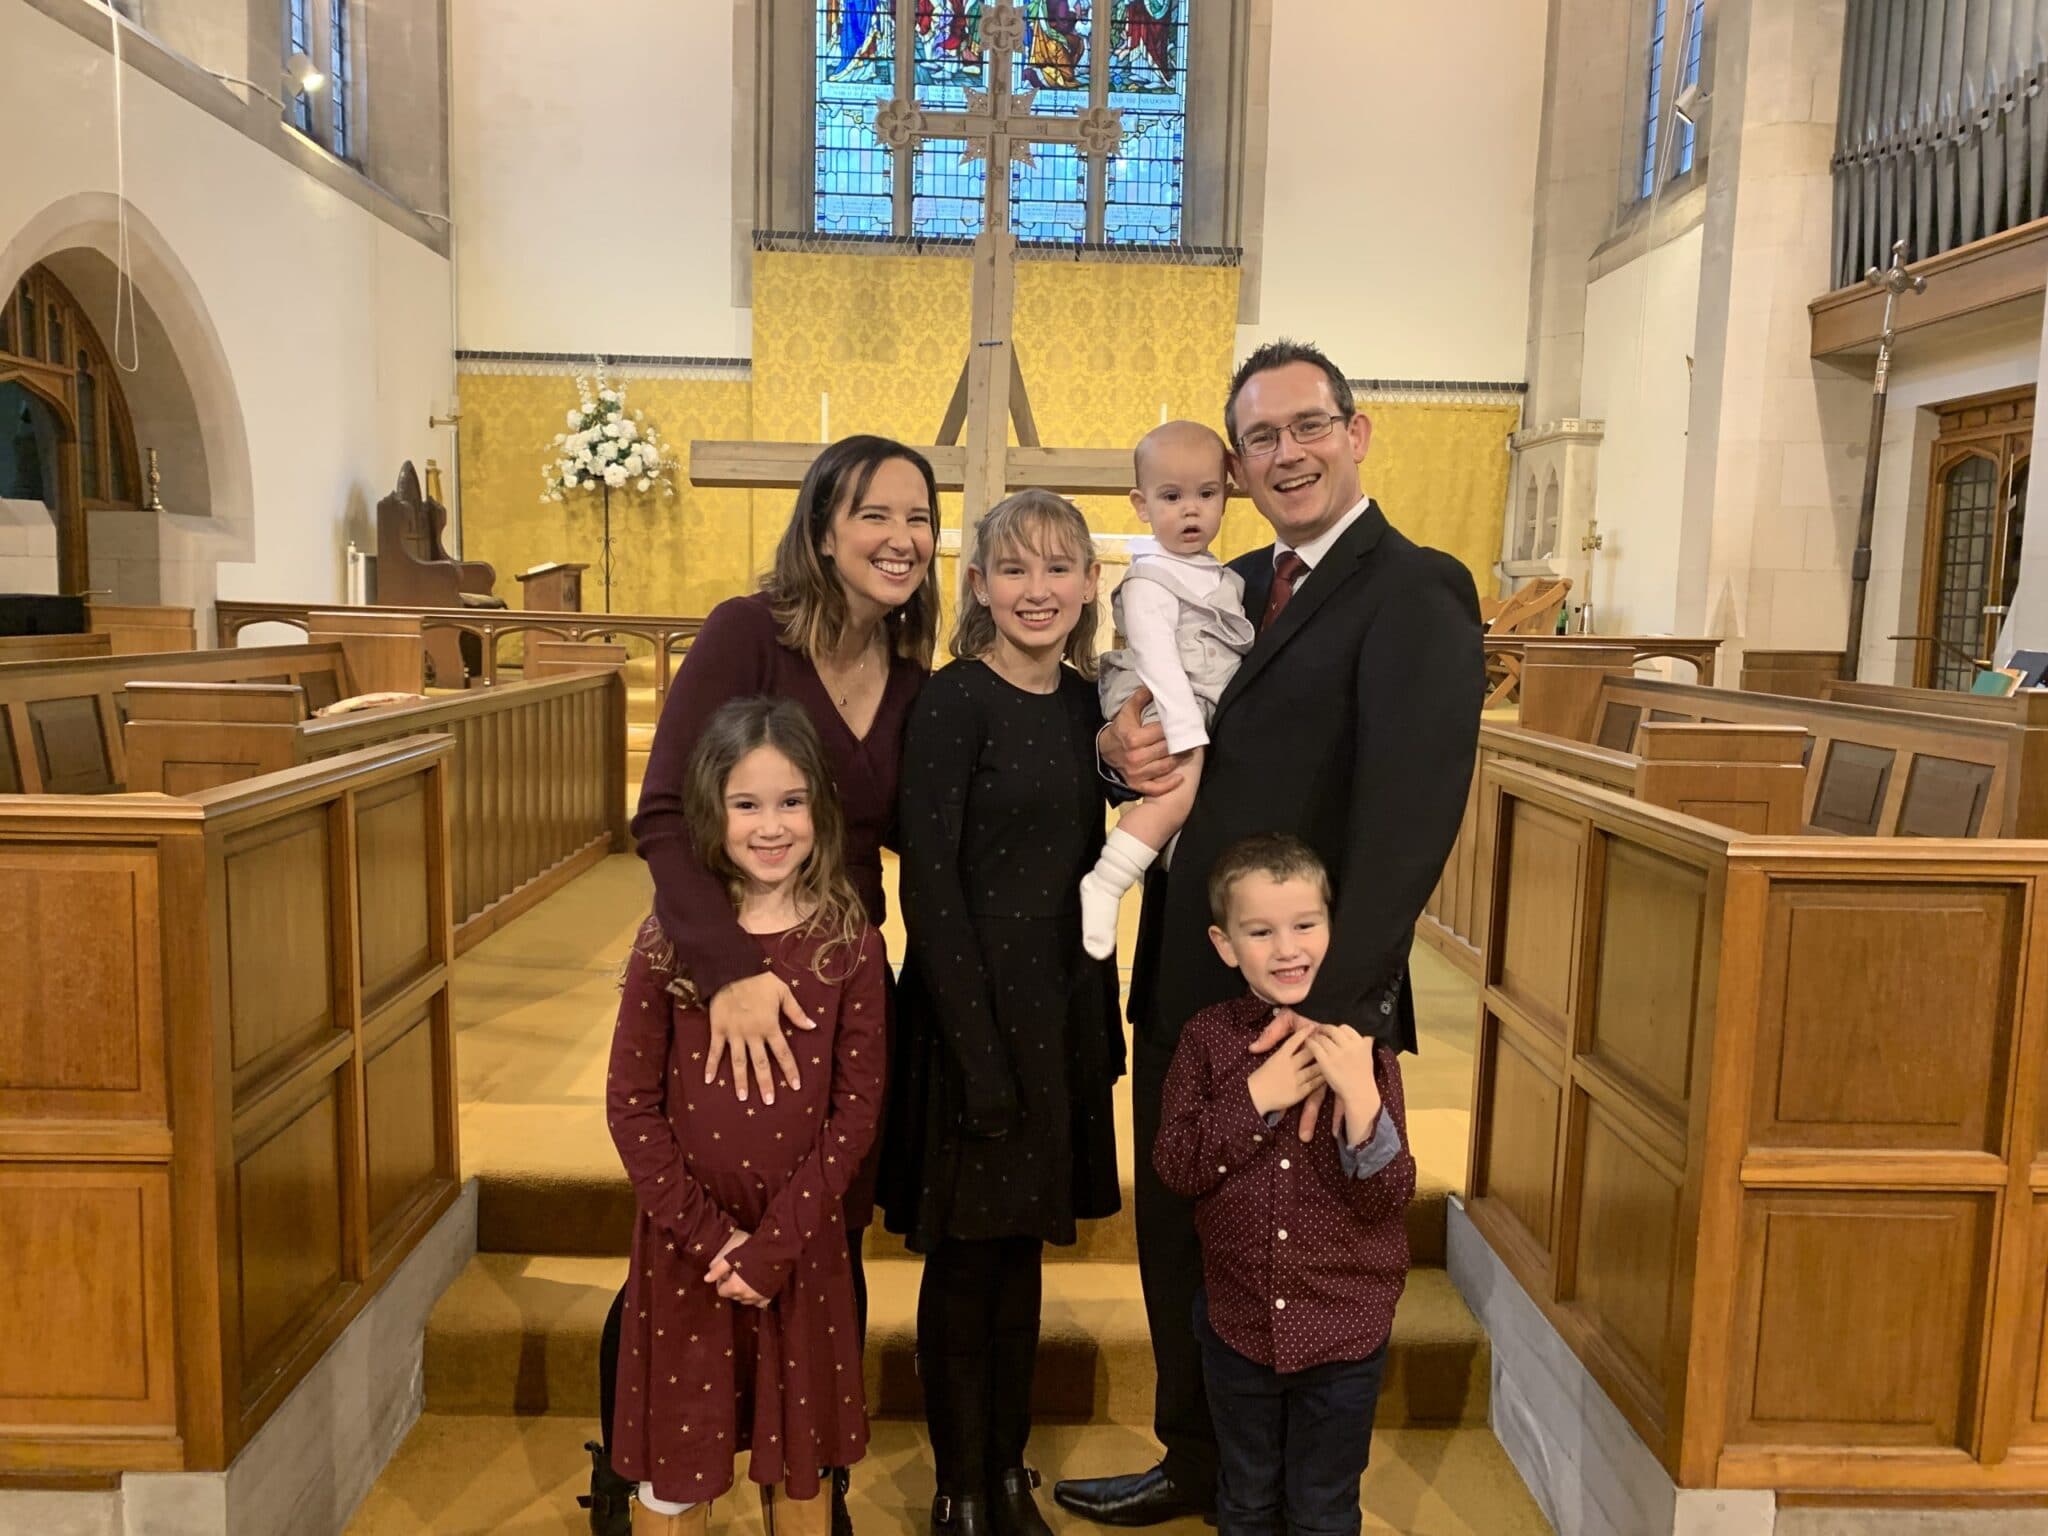 photo of a family of 6 at a baptism in church